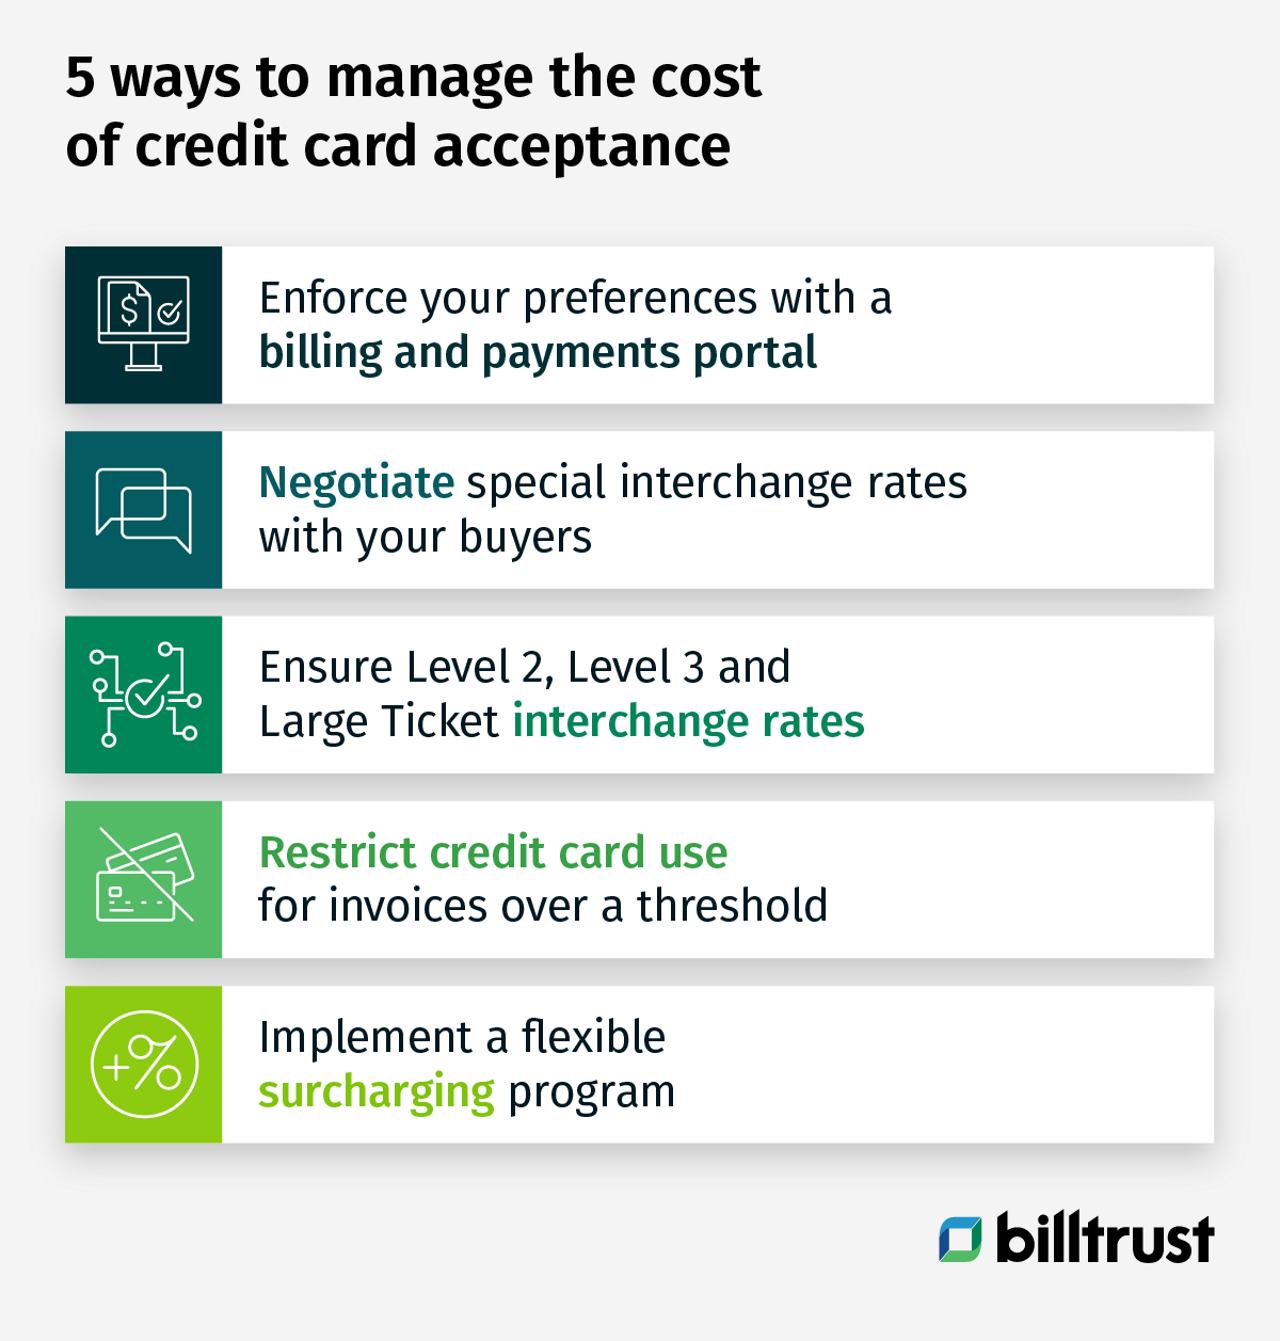 5 ways to manage the cost of credit card acceptance graphic